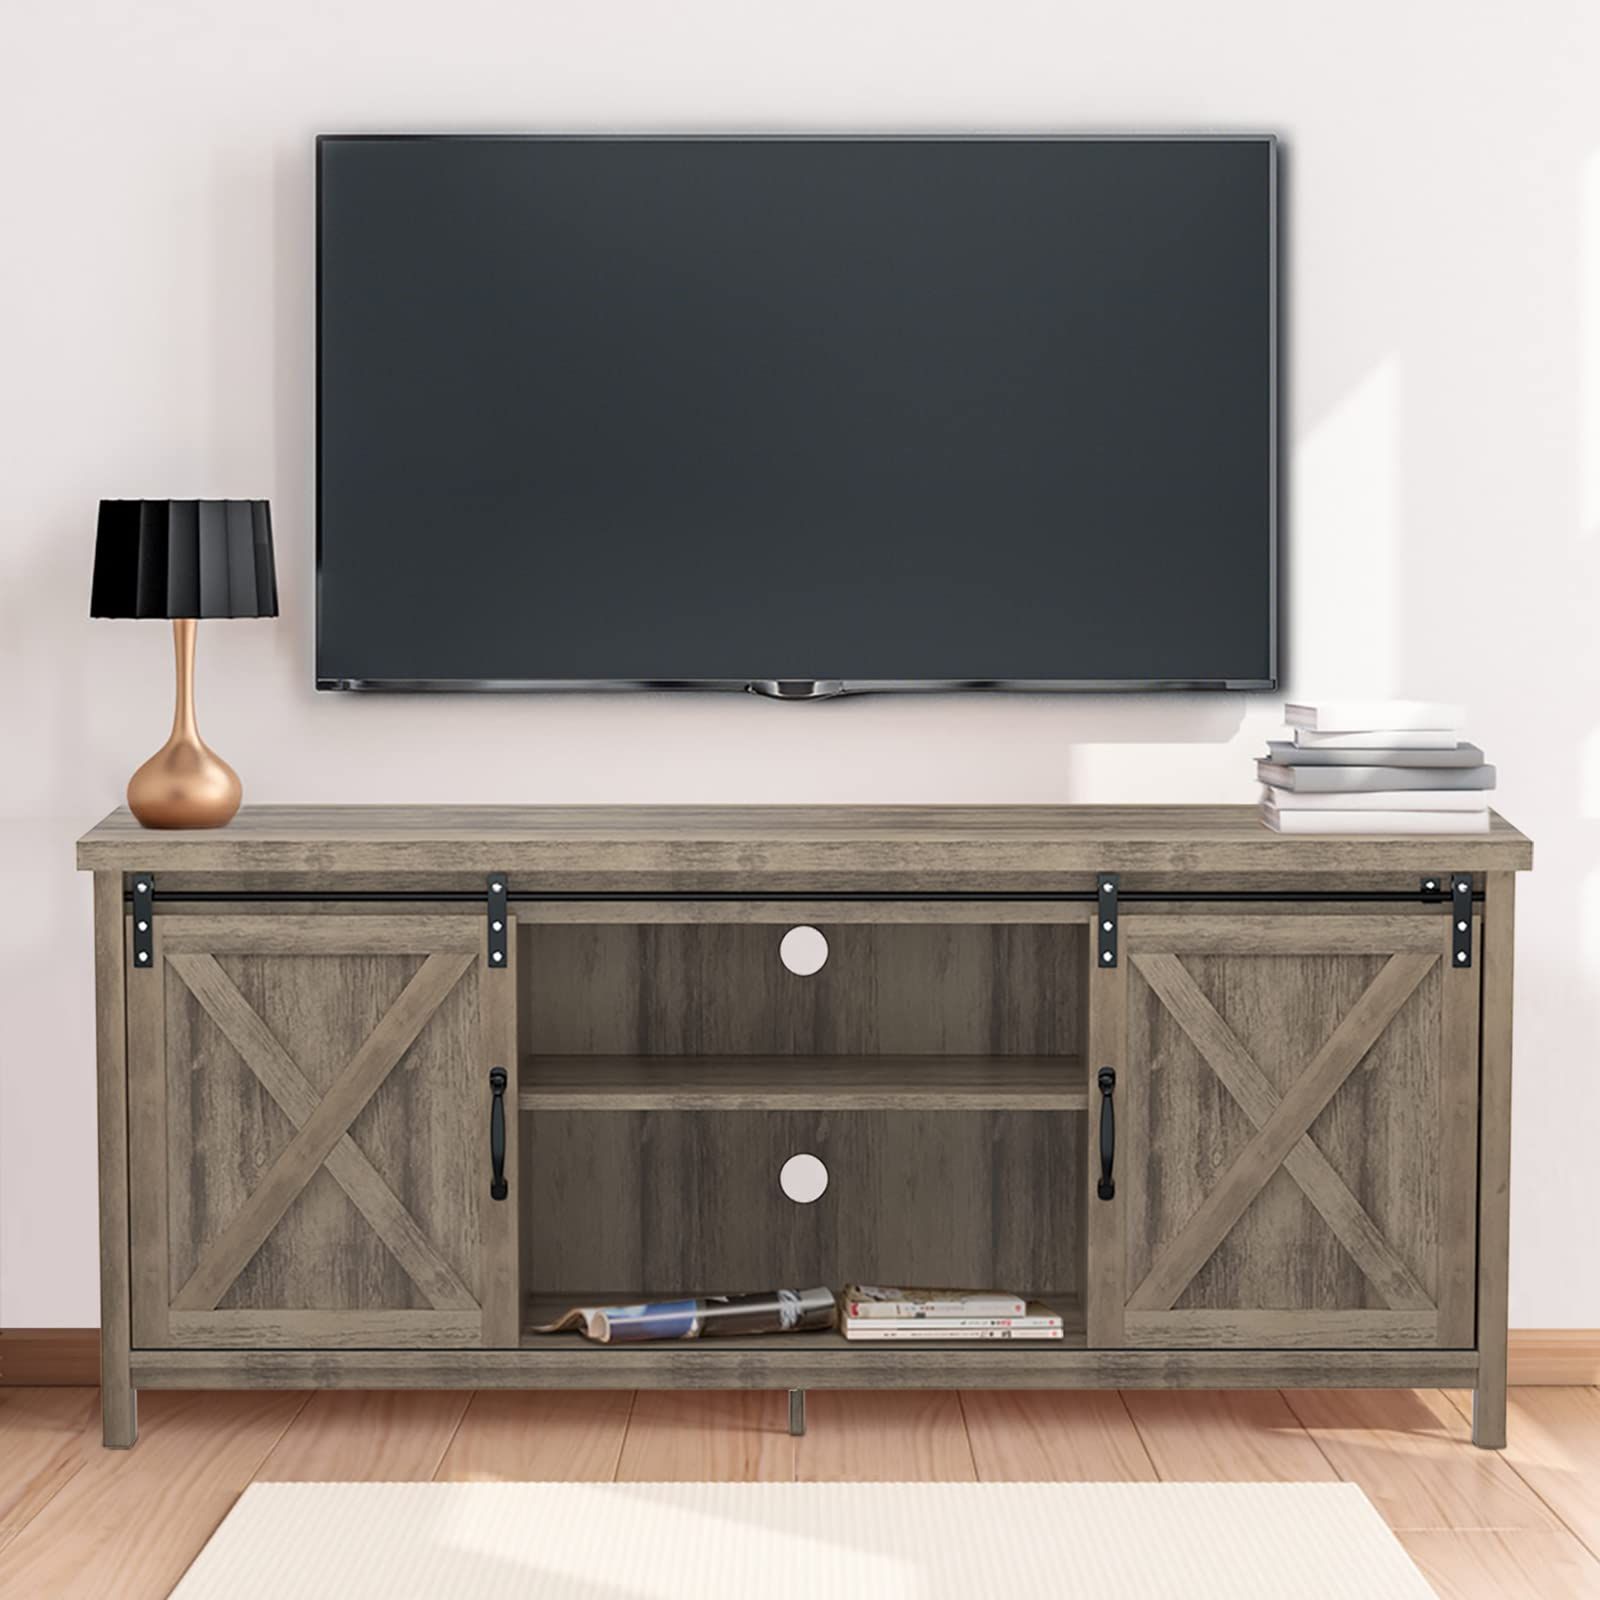 Buy Gazhome Modern Farmhouse Tv Stand With Sliding Barn Doors, Media Throughout Preferred Tier Stand Console Cabinets (View 4 of 15)